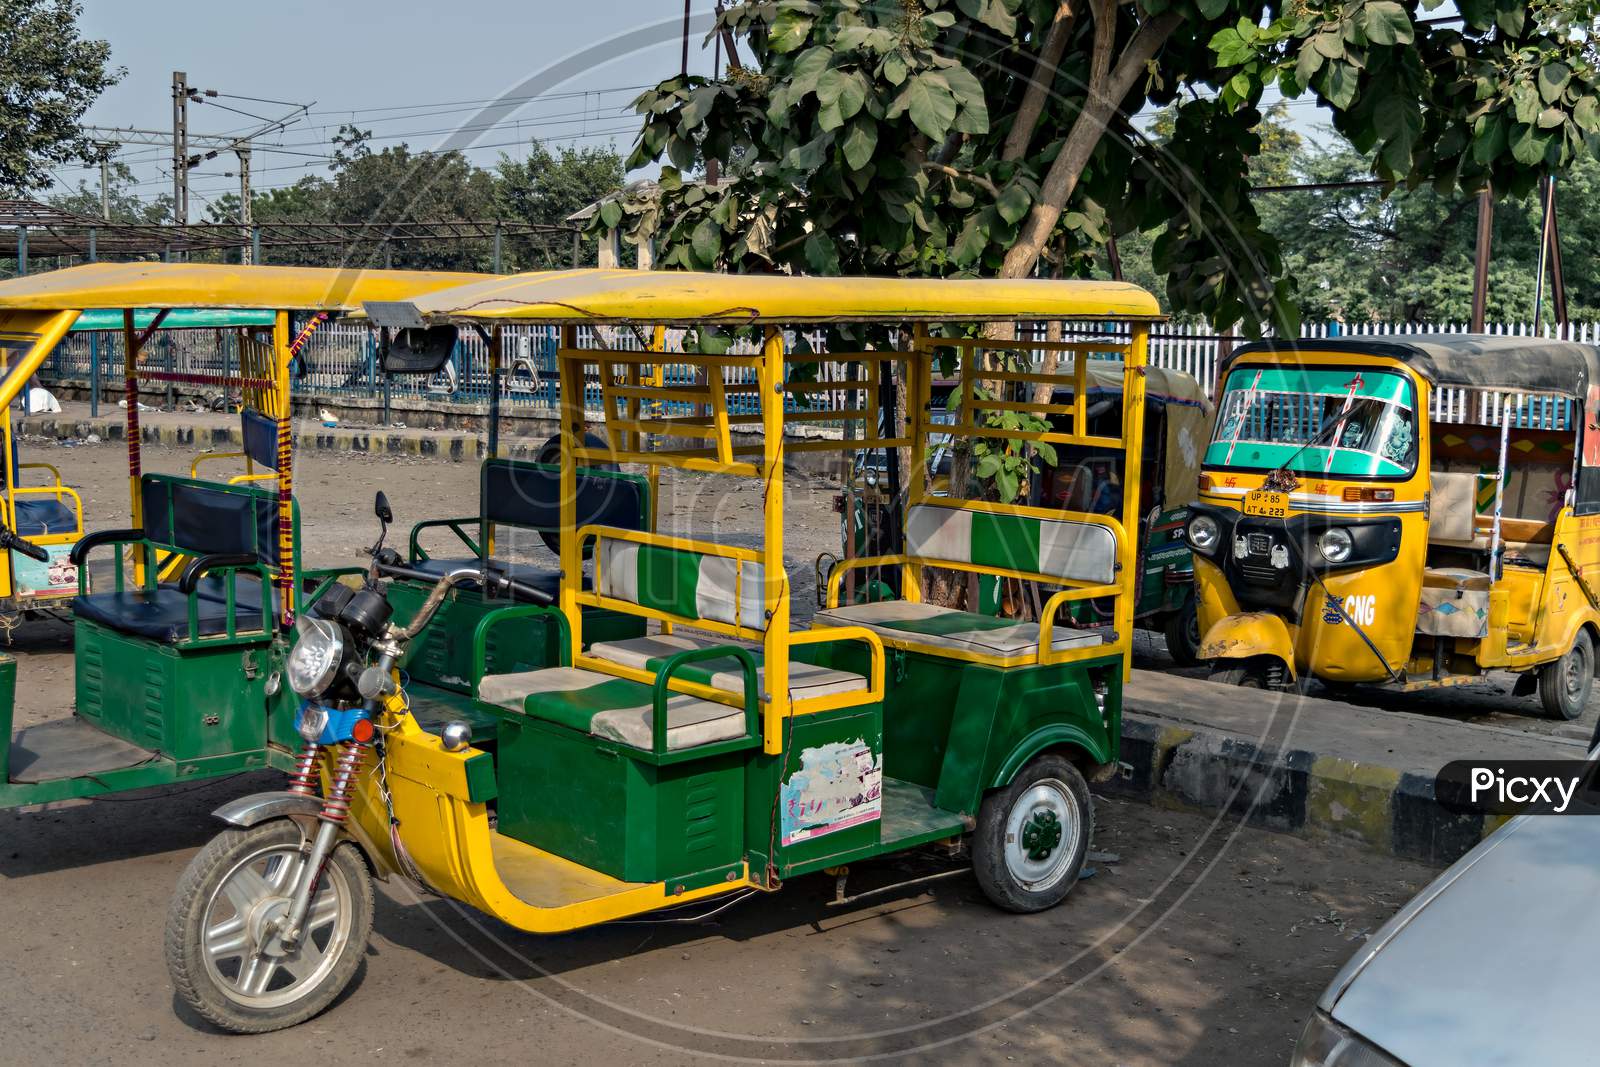 Electric Battery Operated & Old Gas Operated Three Wheeler Auto Rikshaw.